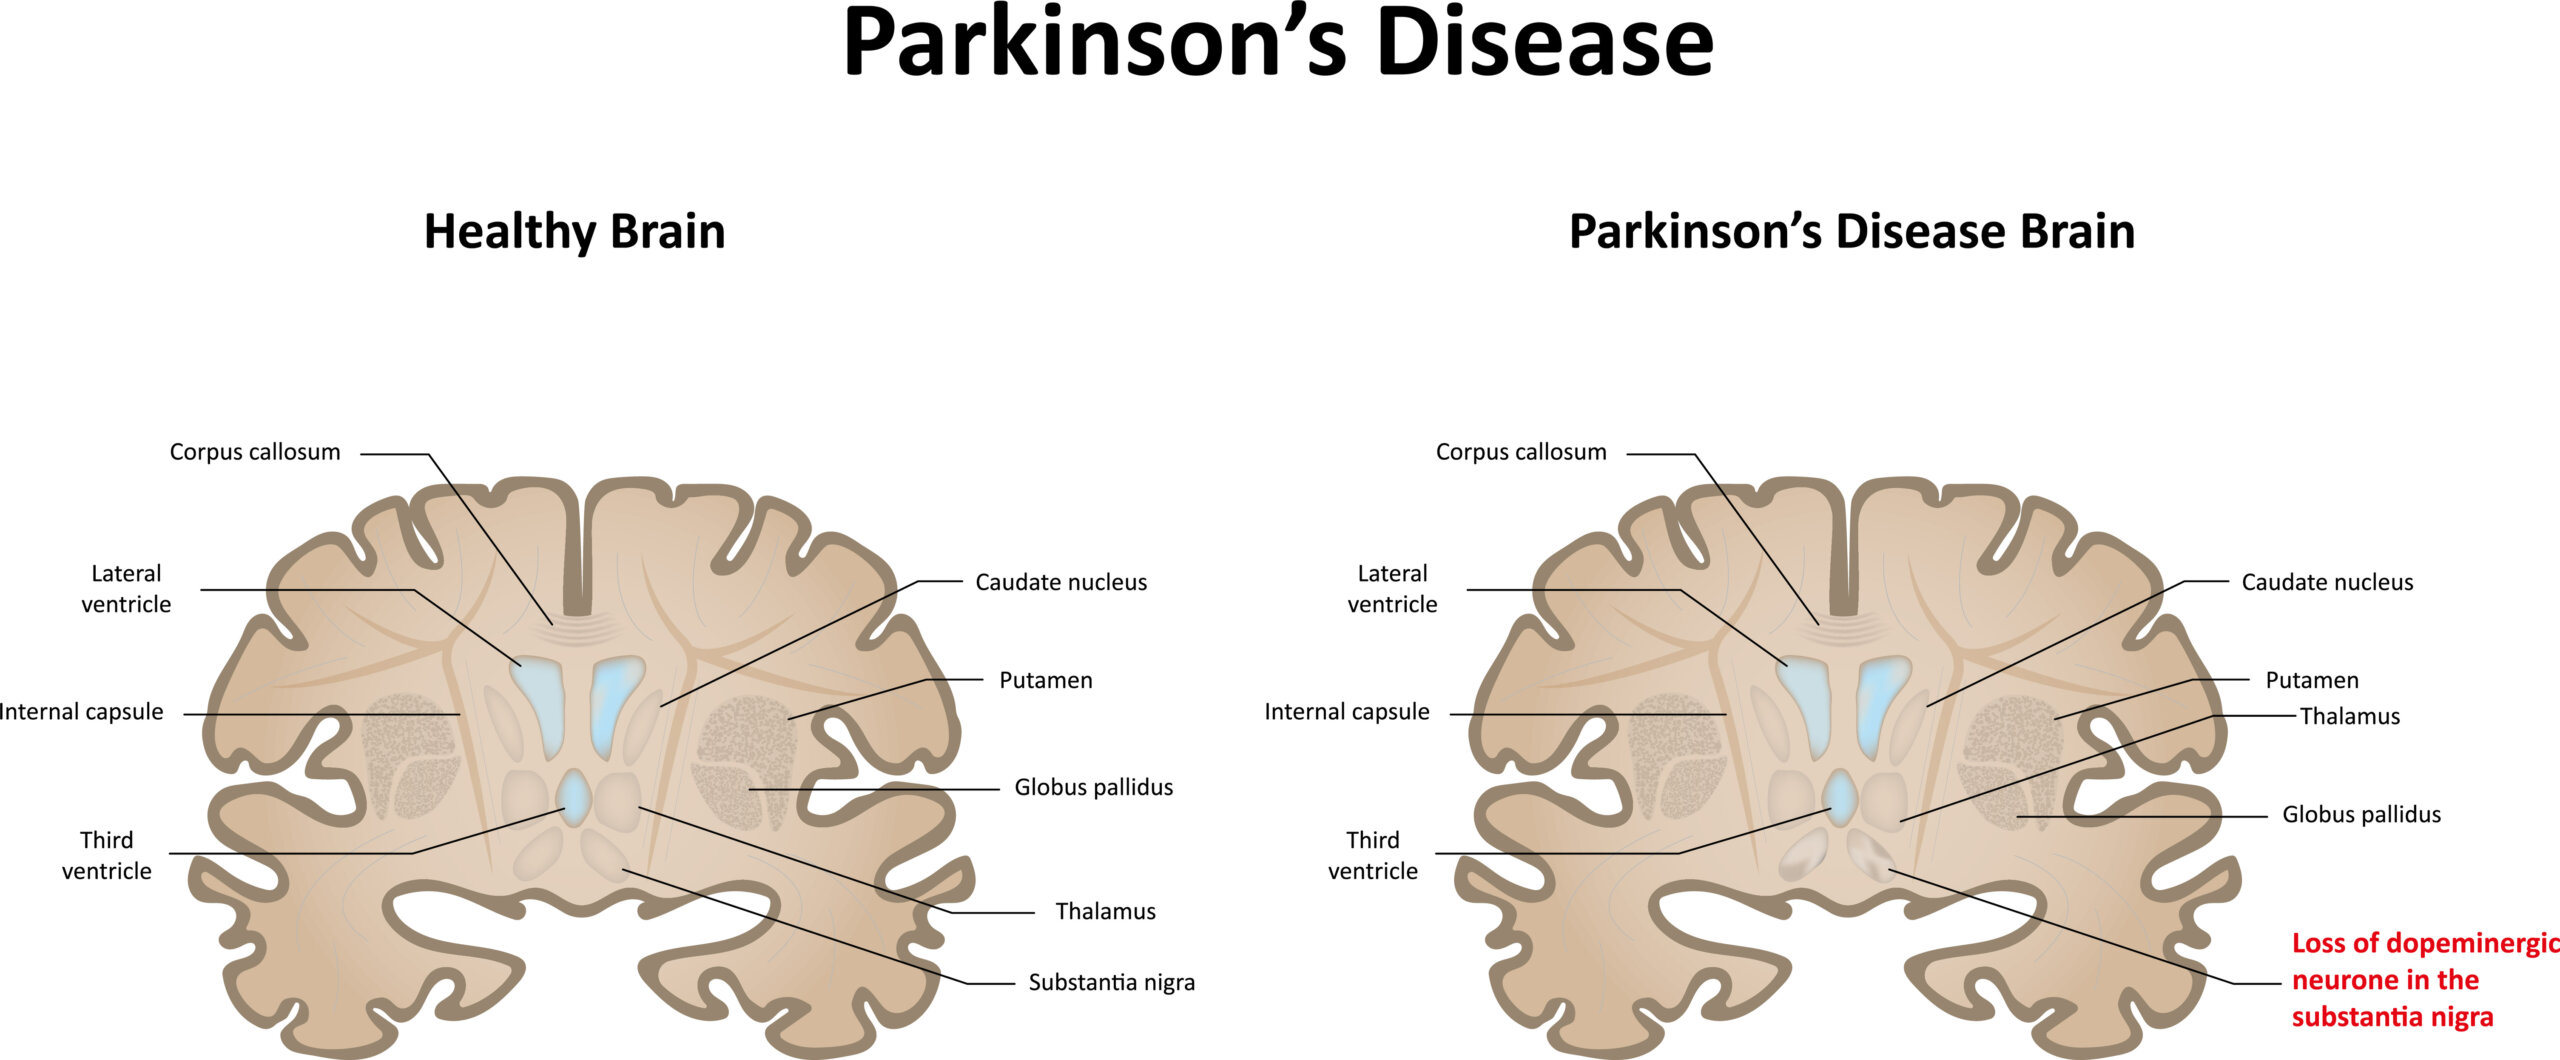 Illustration comparing healthy brain to a brain with Parkinson's 